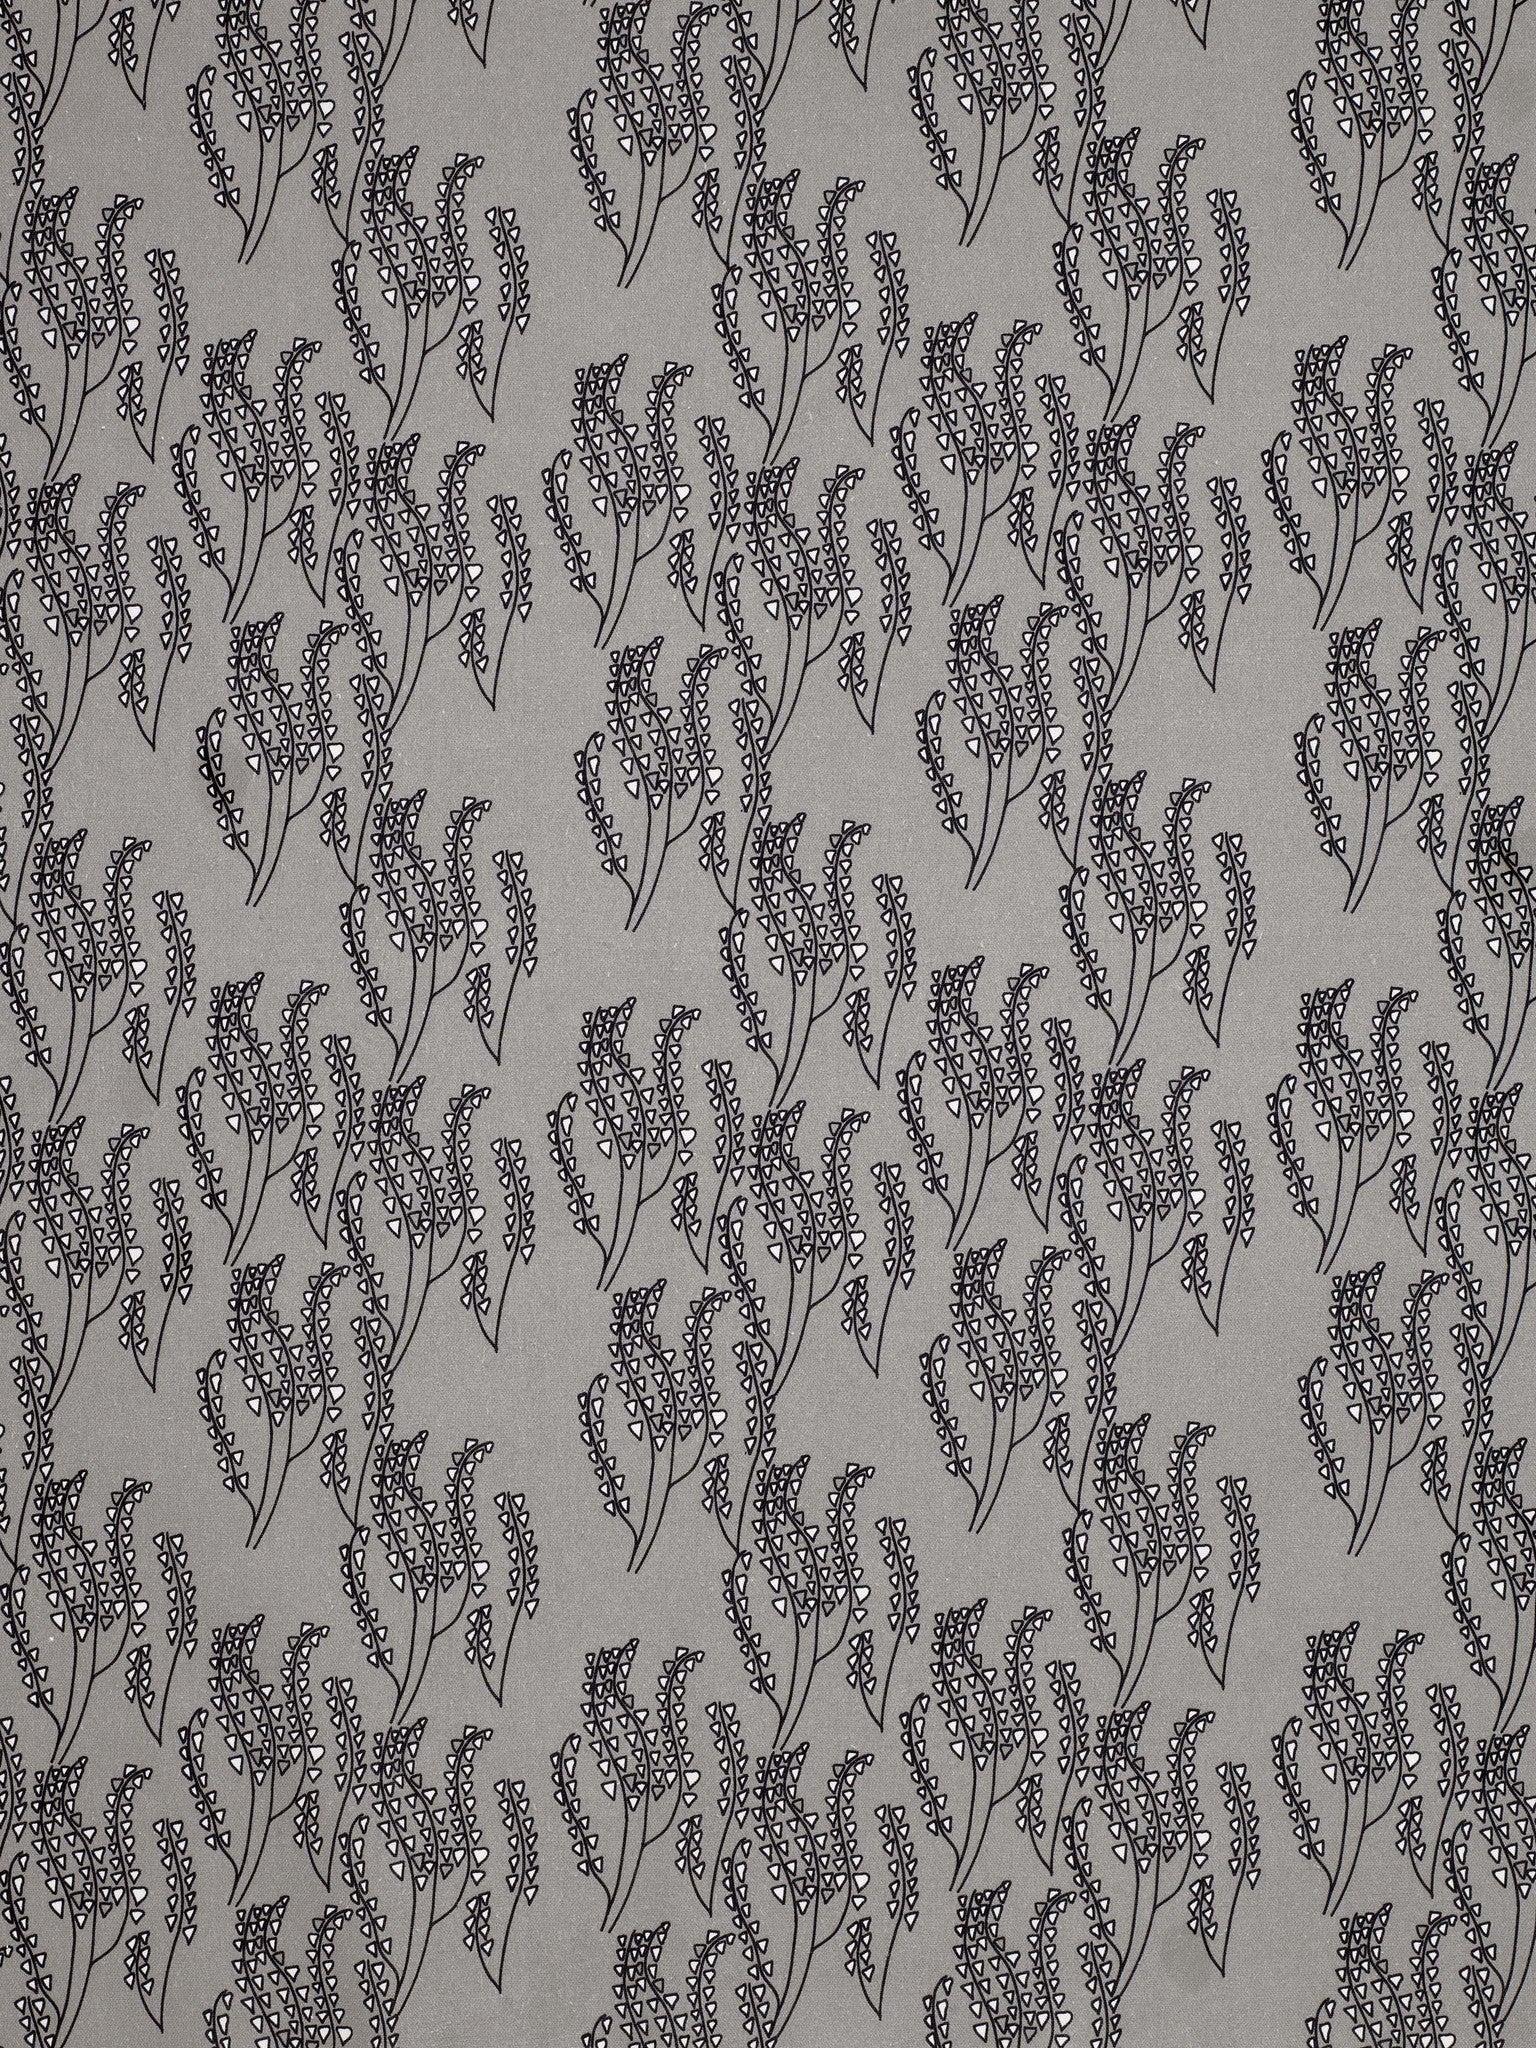 Maricopa Graphic Floral Pattern Cotton Linen Home Decor Fabric by the yard or by the meter for curtains, blinds, upholstery in Light Dove Grey - Black ships from Canada worldwide (USA)